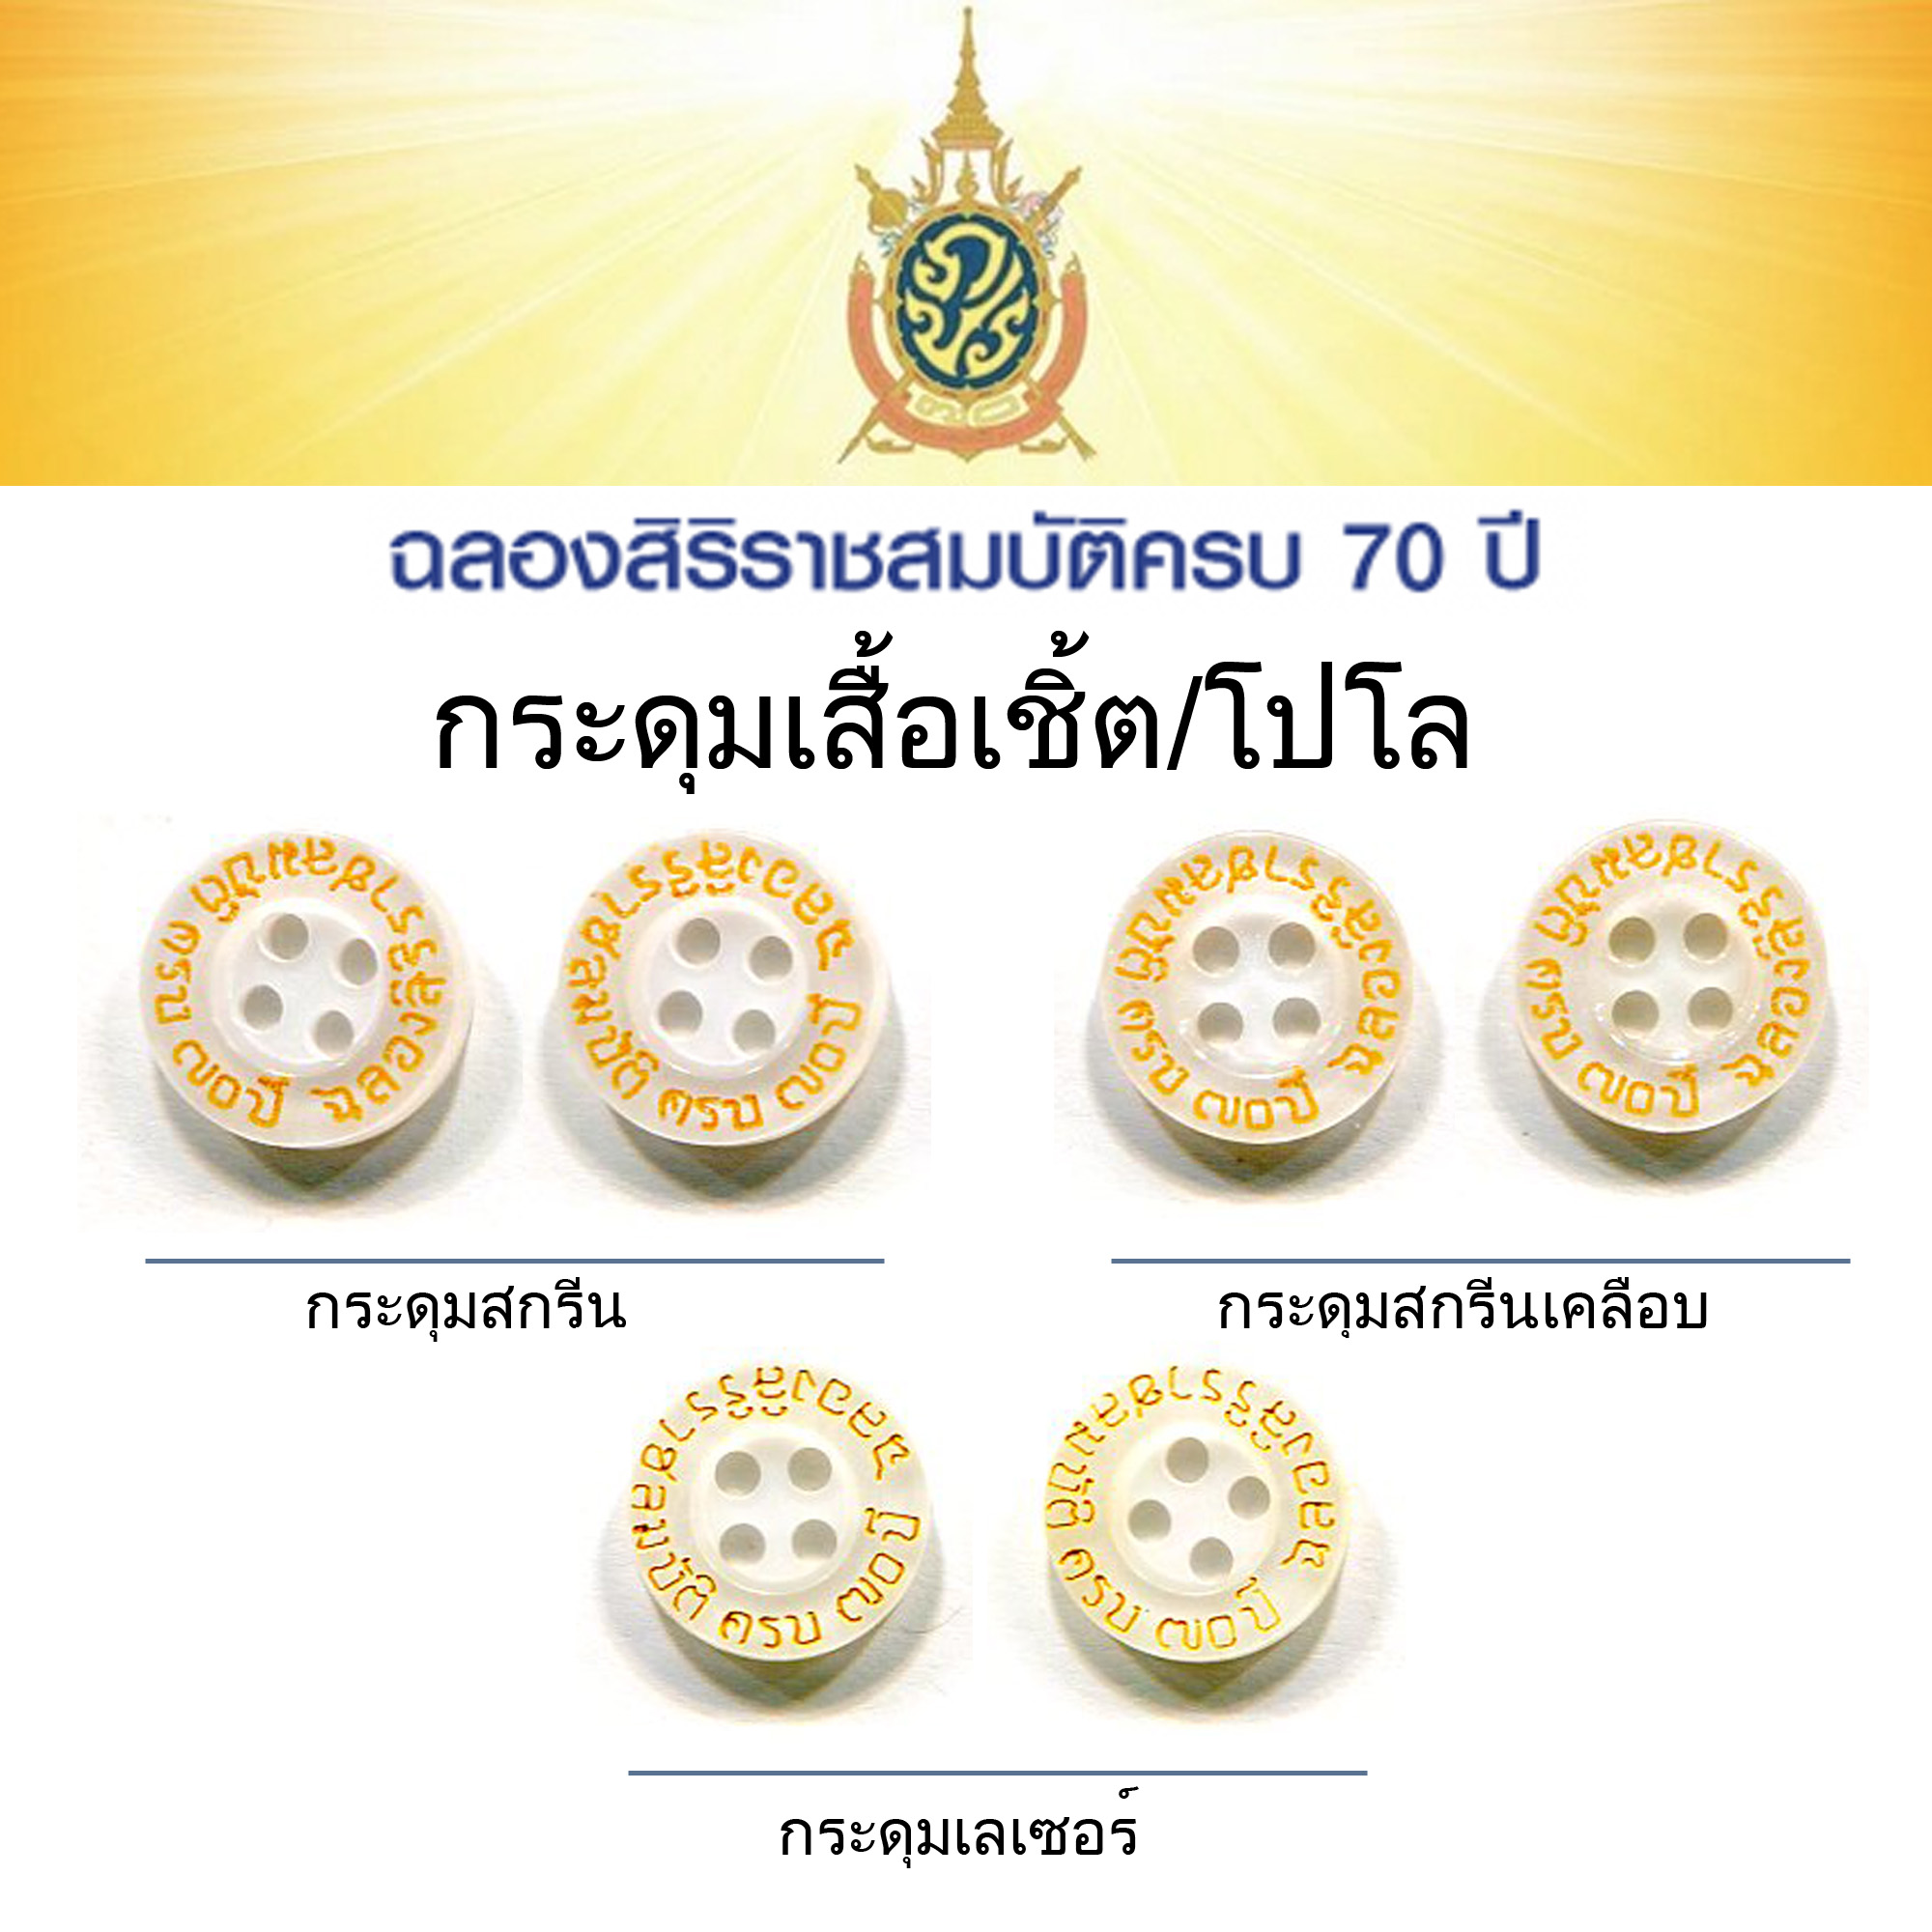 "The Seventieth Anniversary Celebration of His Majesty’s Accession to the Throne Button”